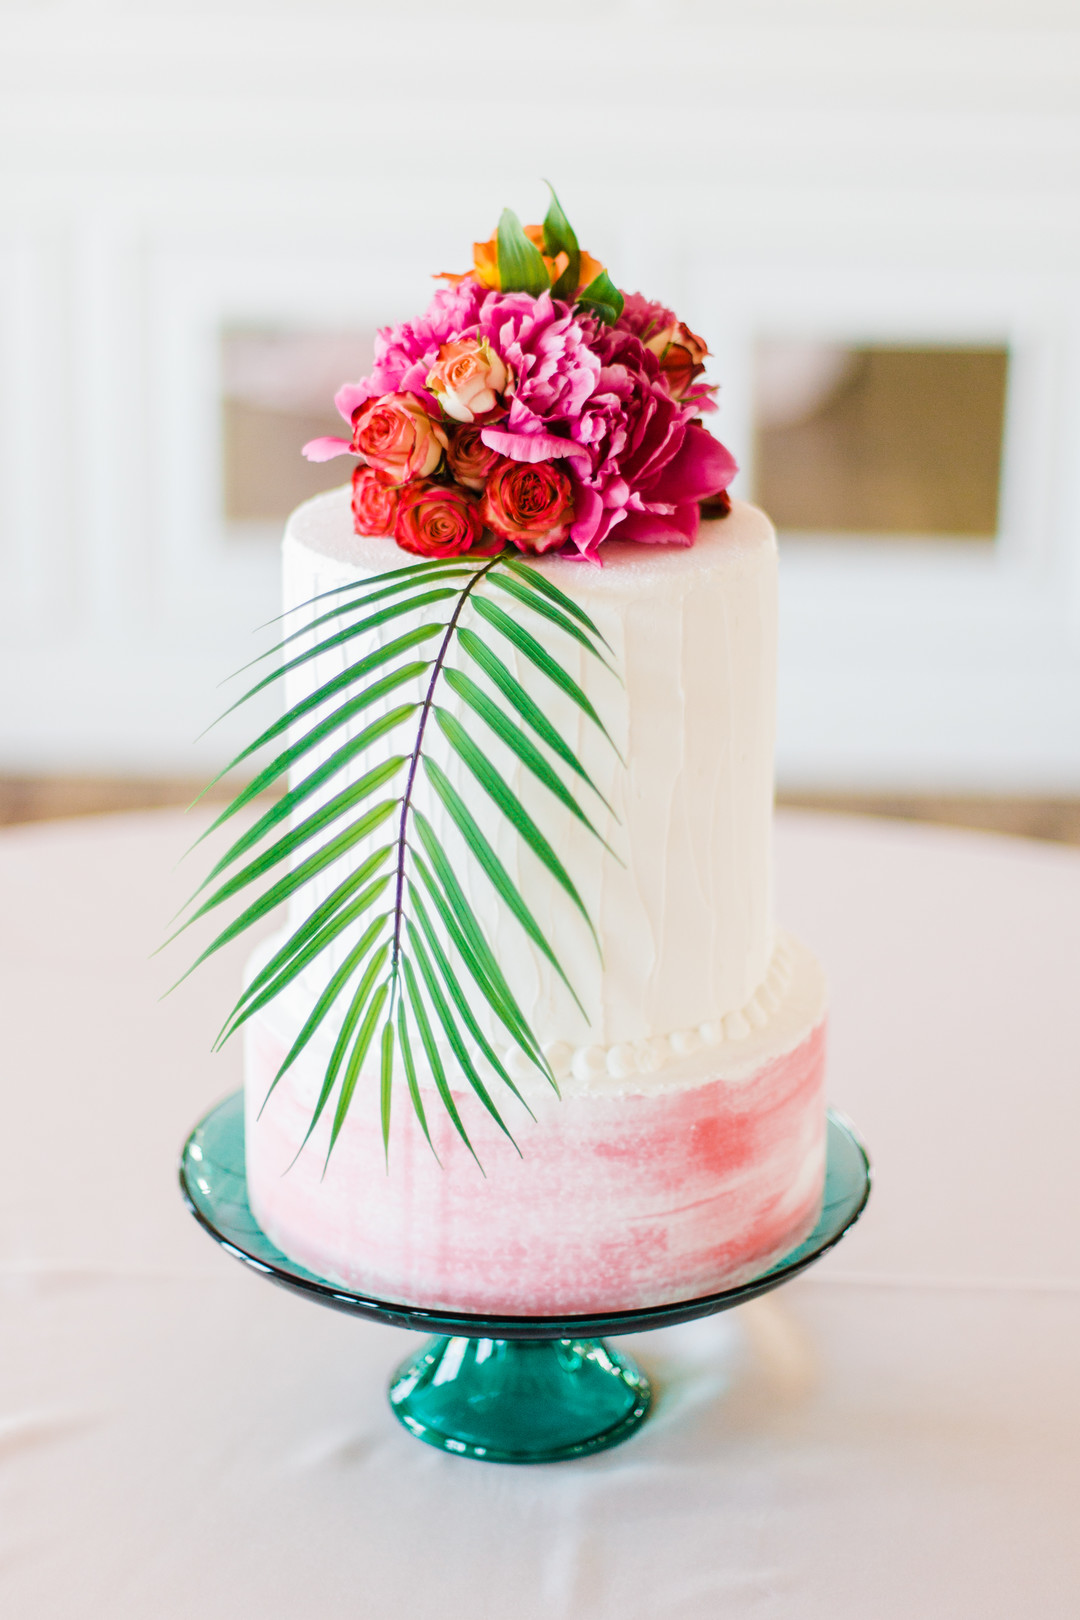 Tropical wedding cake: Tropical Eclectic Wedding Inspiration captured by Grace Rios Photography featured on CHI thee WED. See more colorful wedding ideas at CHItheeWED.com!